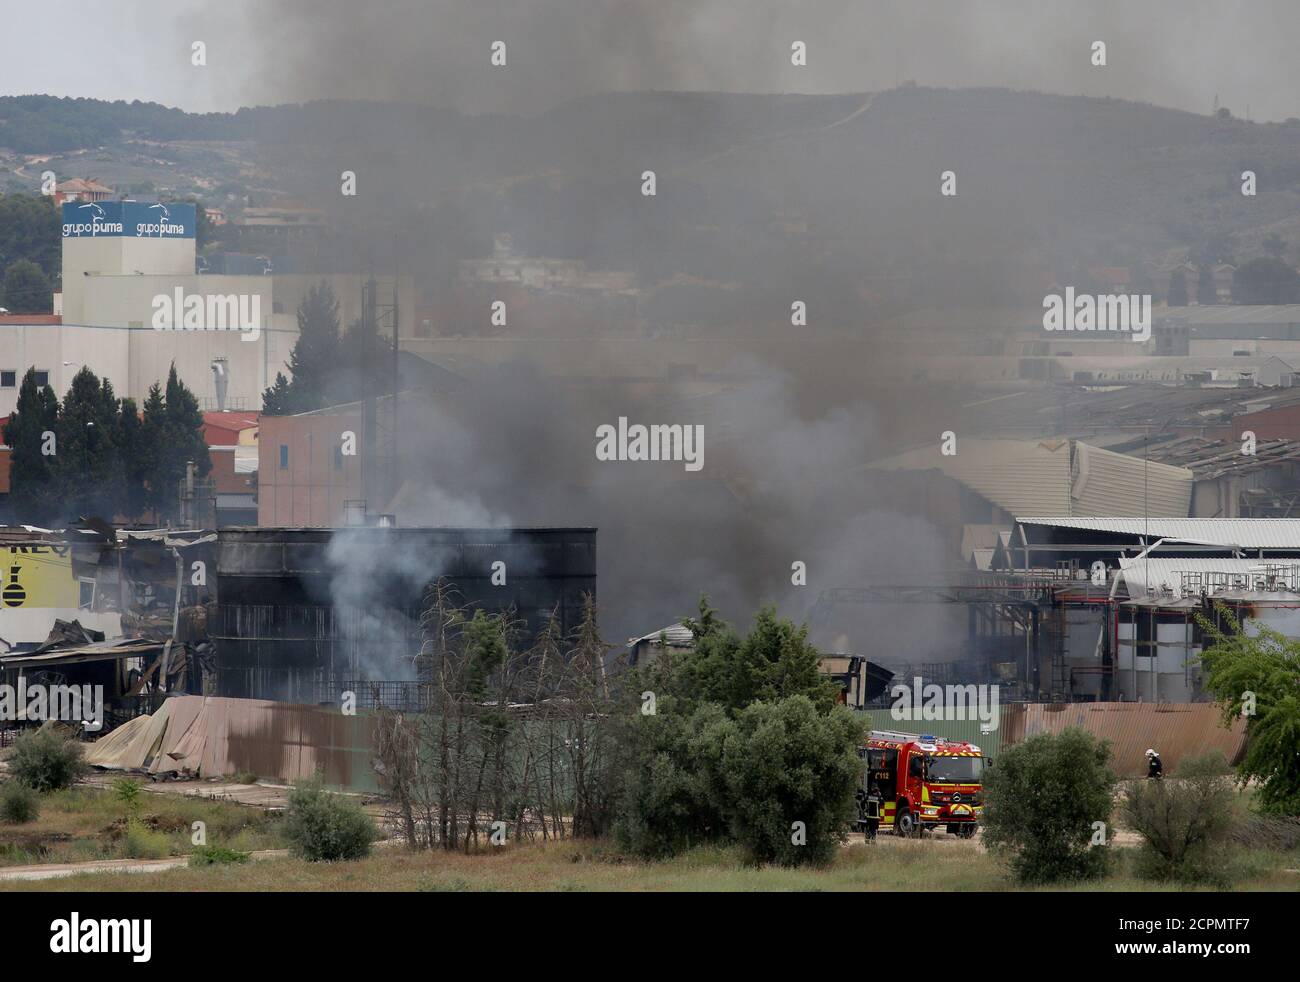 Smoke rises after a fire at an industrial park in Arganda del Rey, outside  Madrid, Spain May 4, 2017. REUTERS/Sergio Perez Stock Photo - Alamy